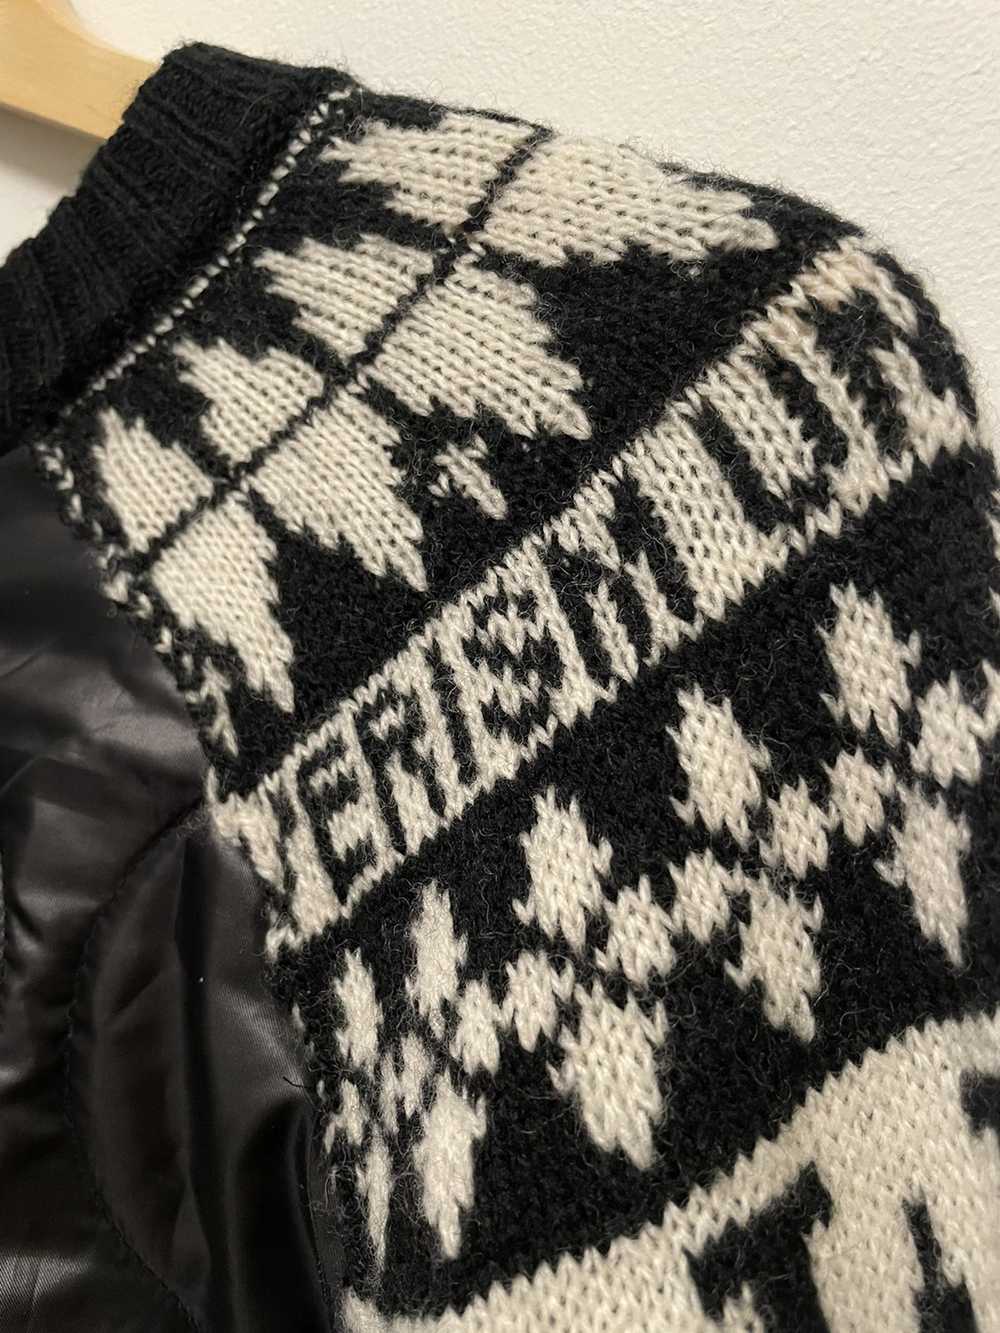 Undercover Undercoverism knit wear/sweater - image 3